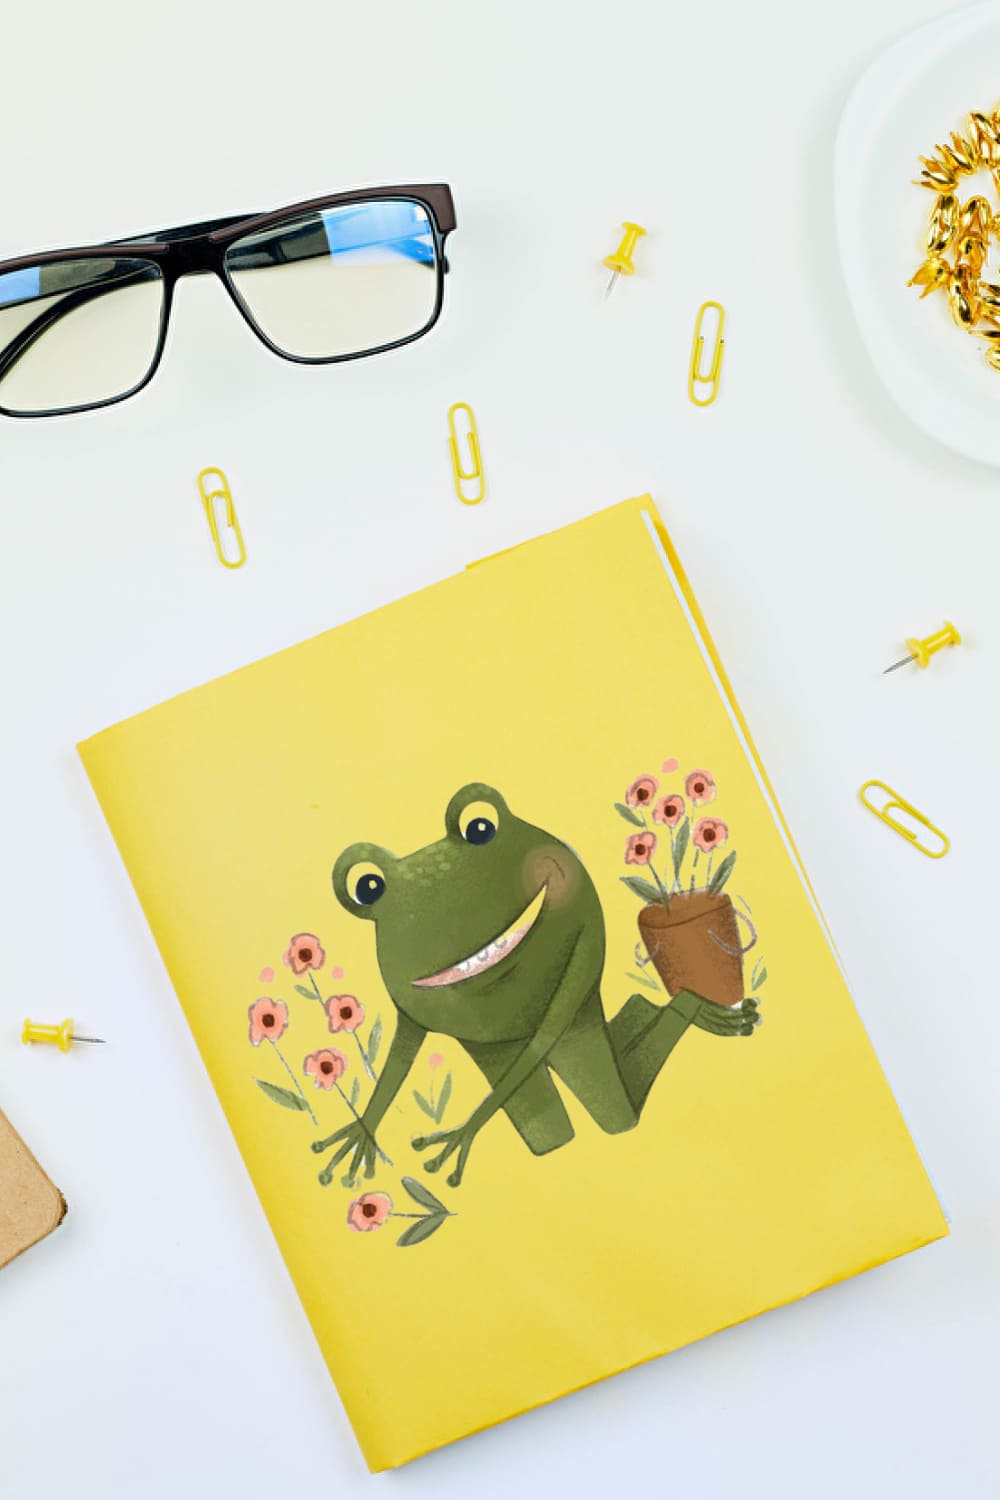 This product includes frog characters style.